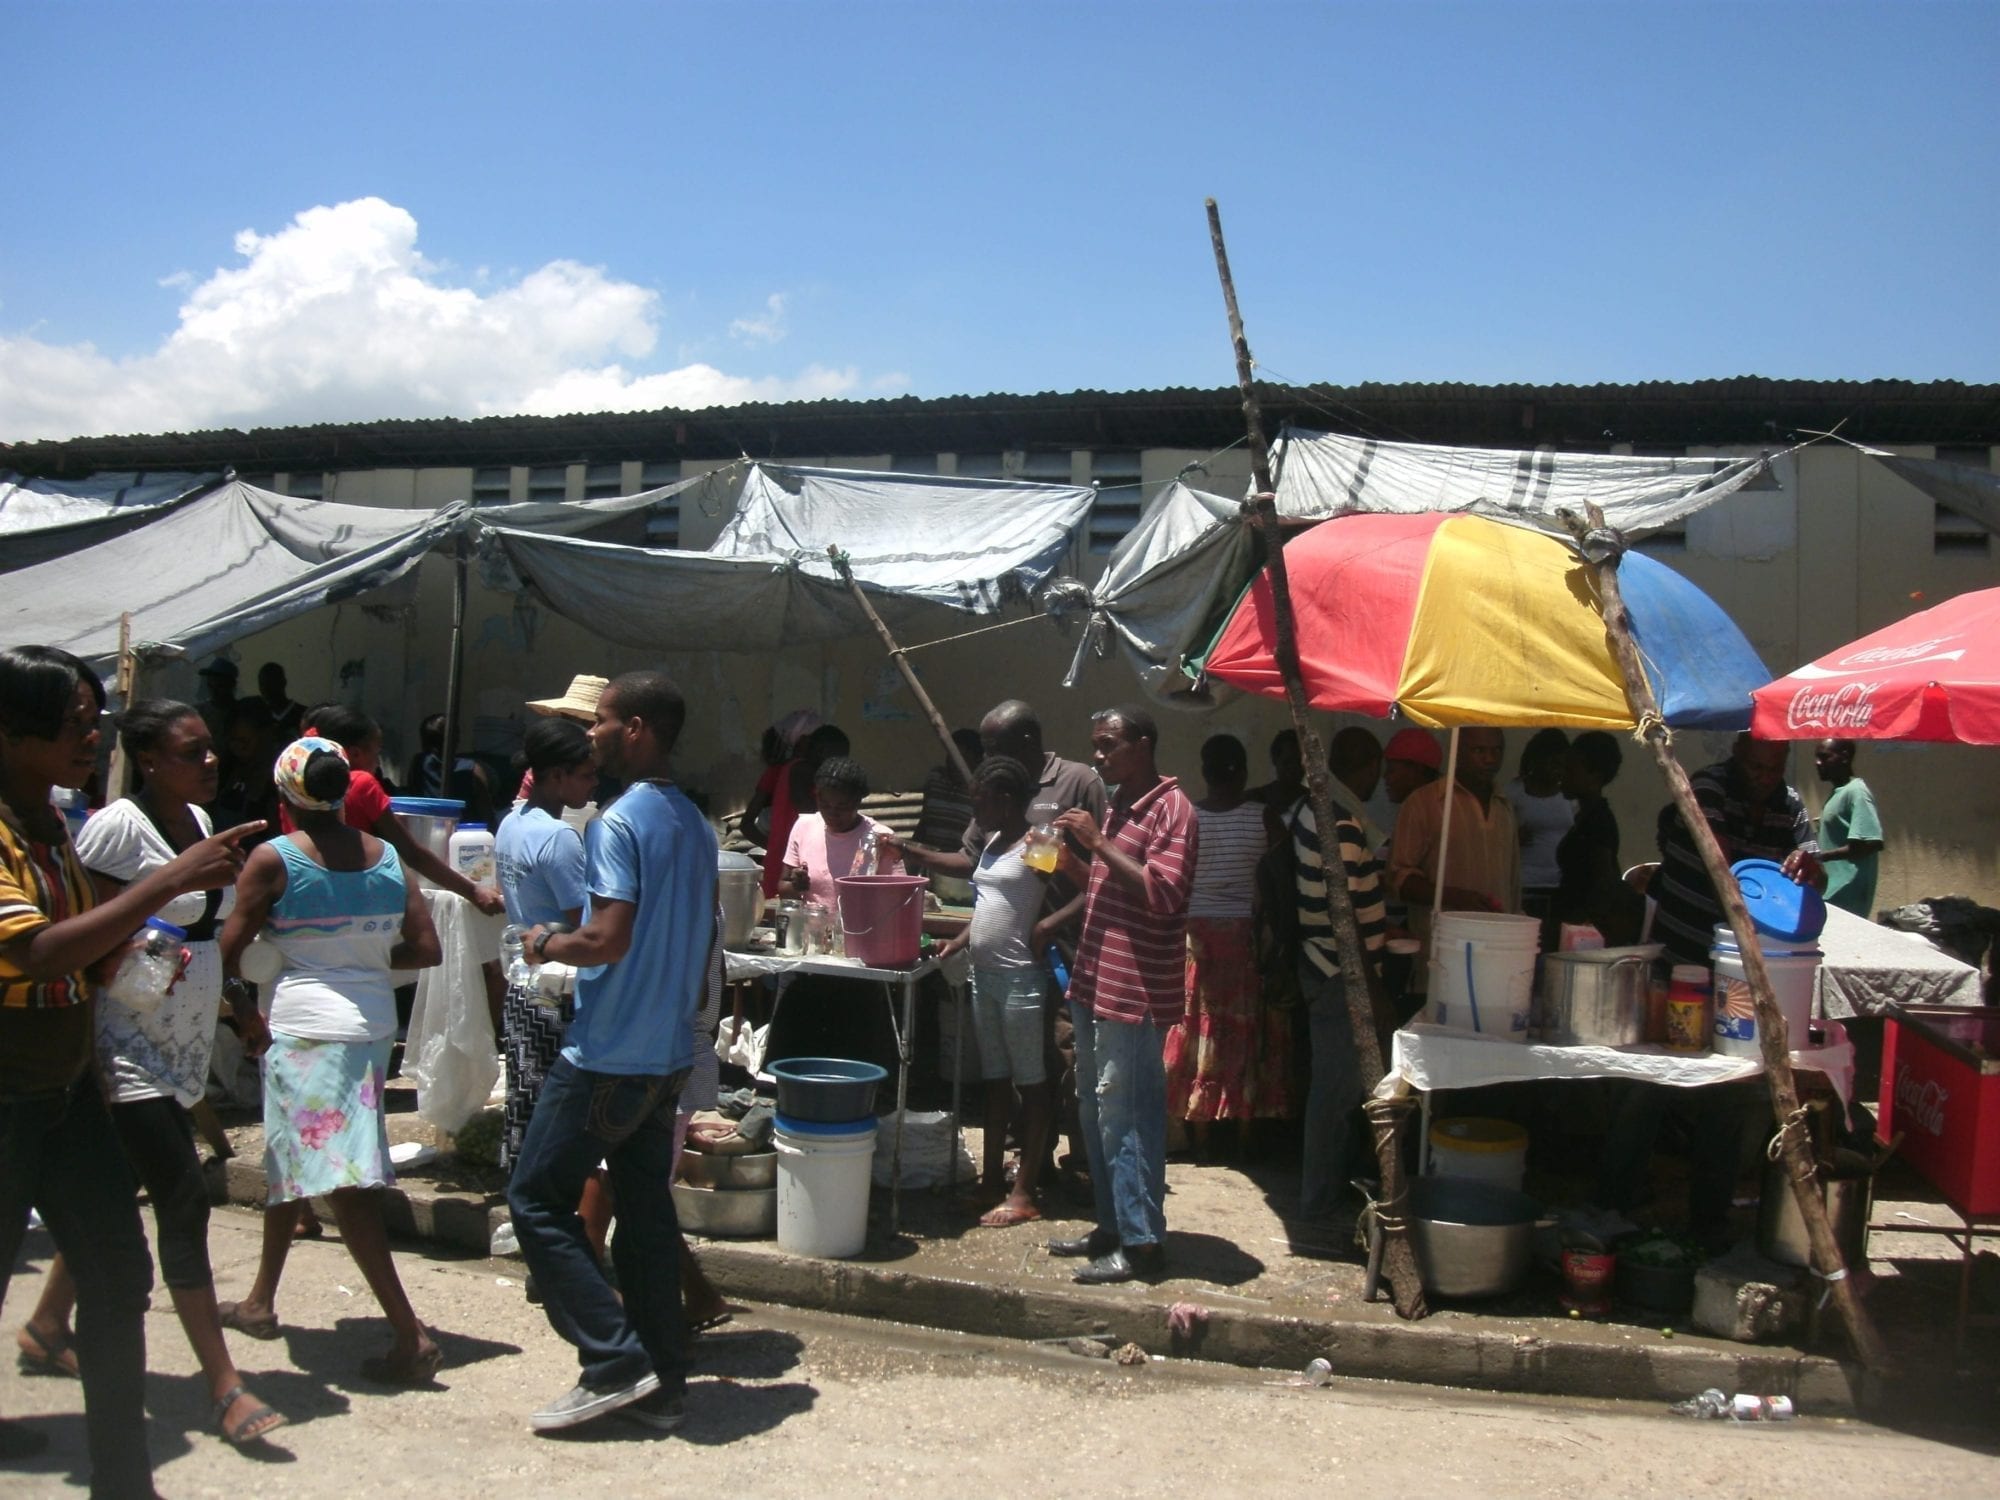 Five Years after Haiti Earthquake, Workers Still Struggle with Low Wages